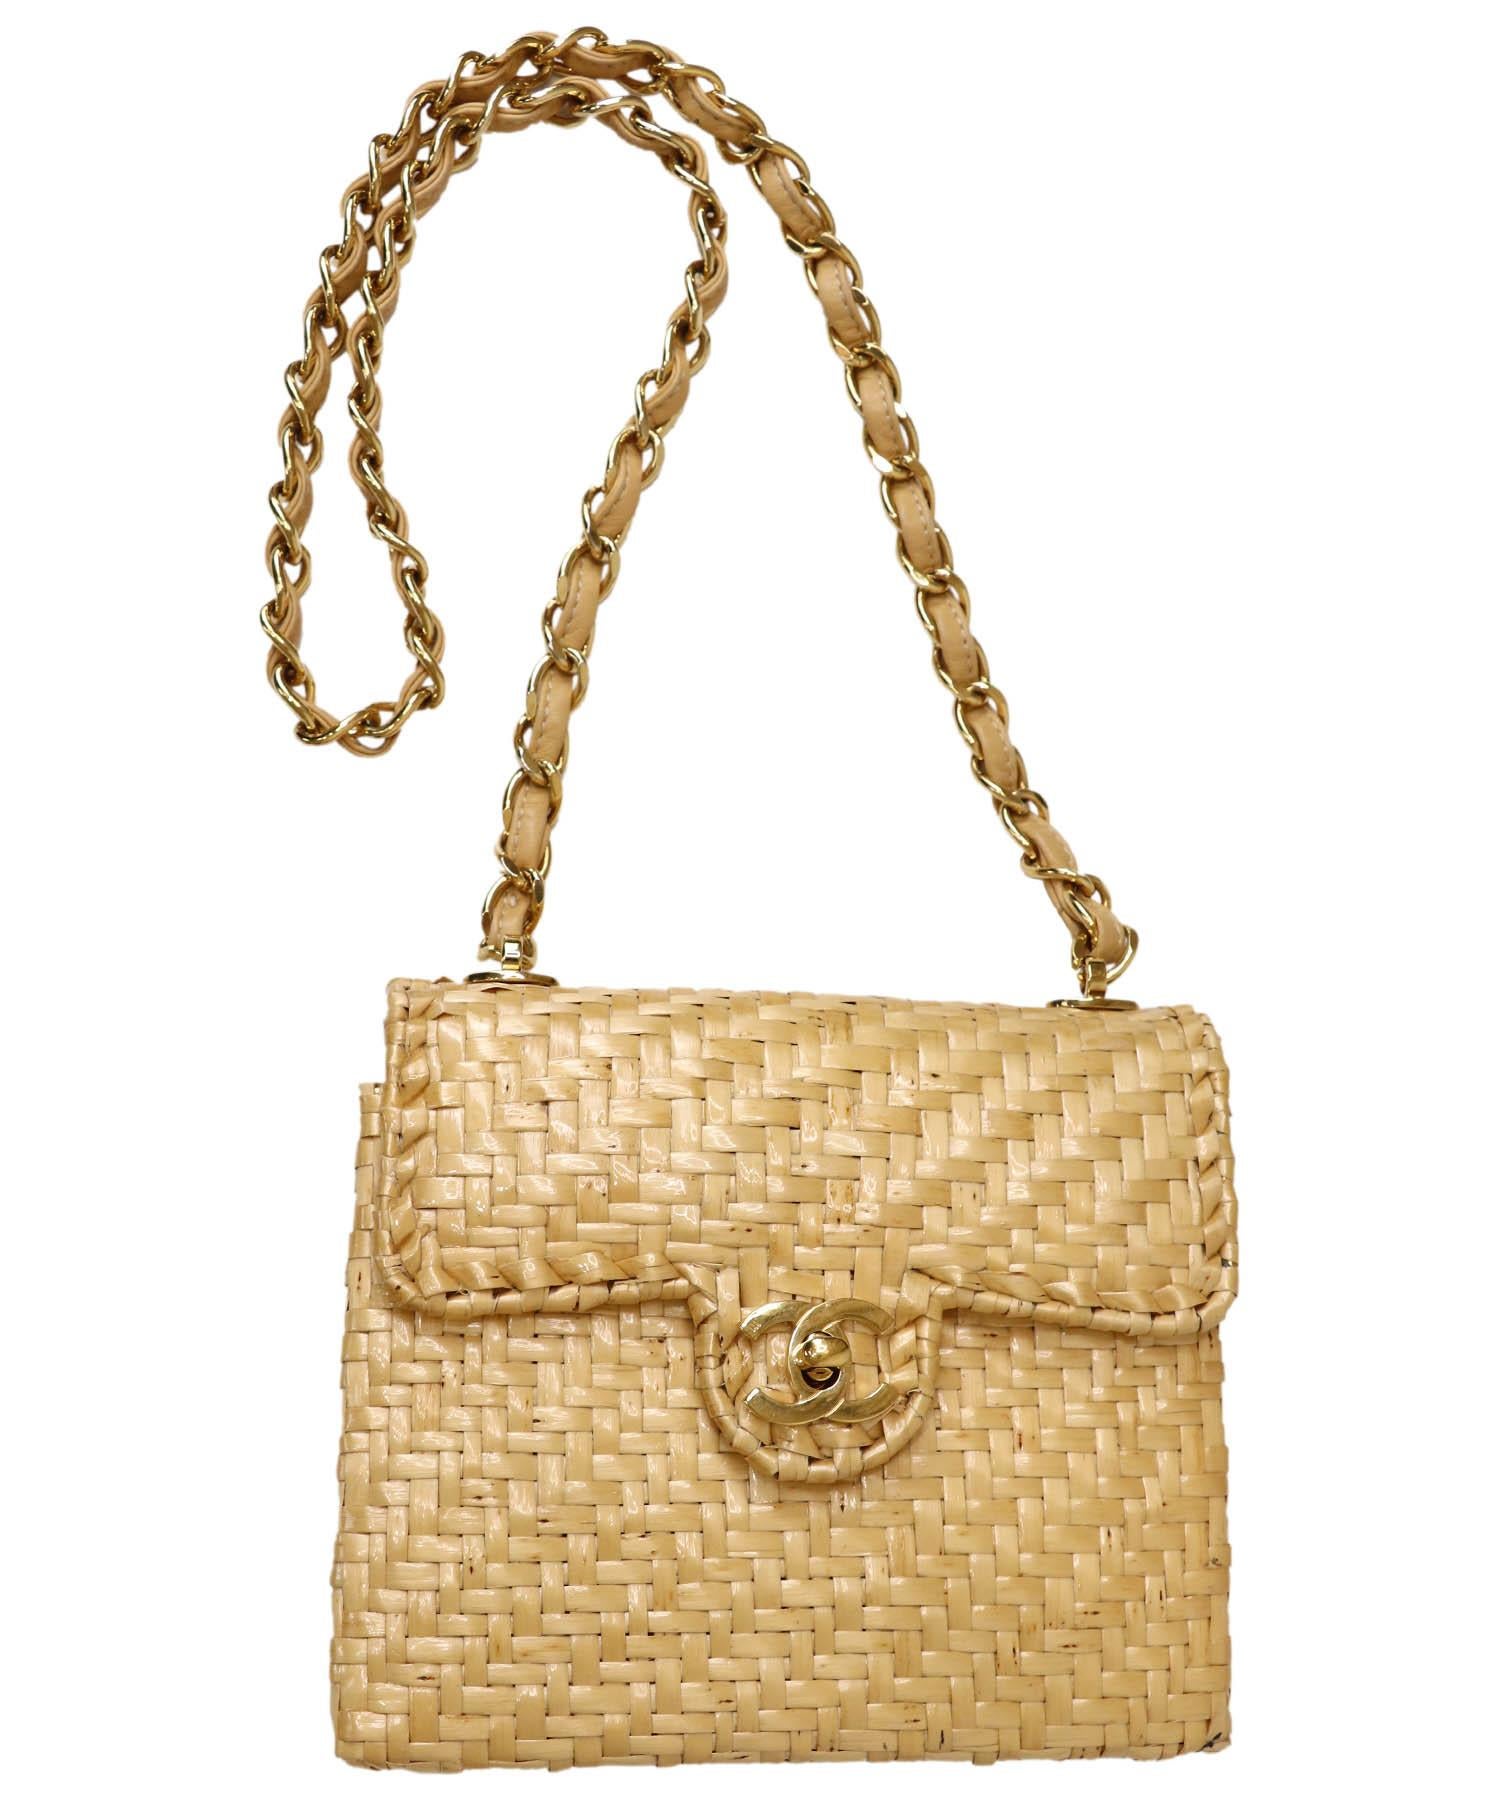 What a fabulous find! This rare vintage tan Chanel wicker shoulder or short crossbody bag is small and square in shape and has a 24k gold plated CC Turnlock closure at the front. The bag and flap are both structured. Flap opens to a hinged interior